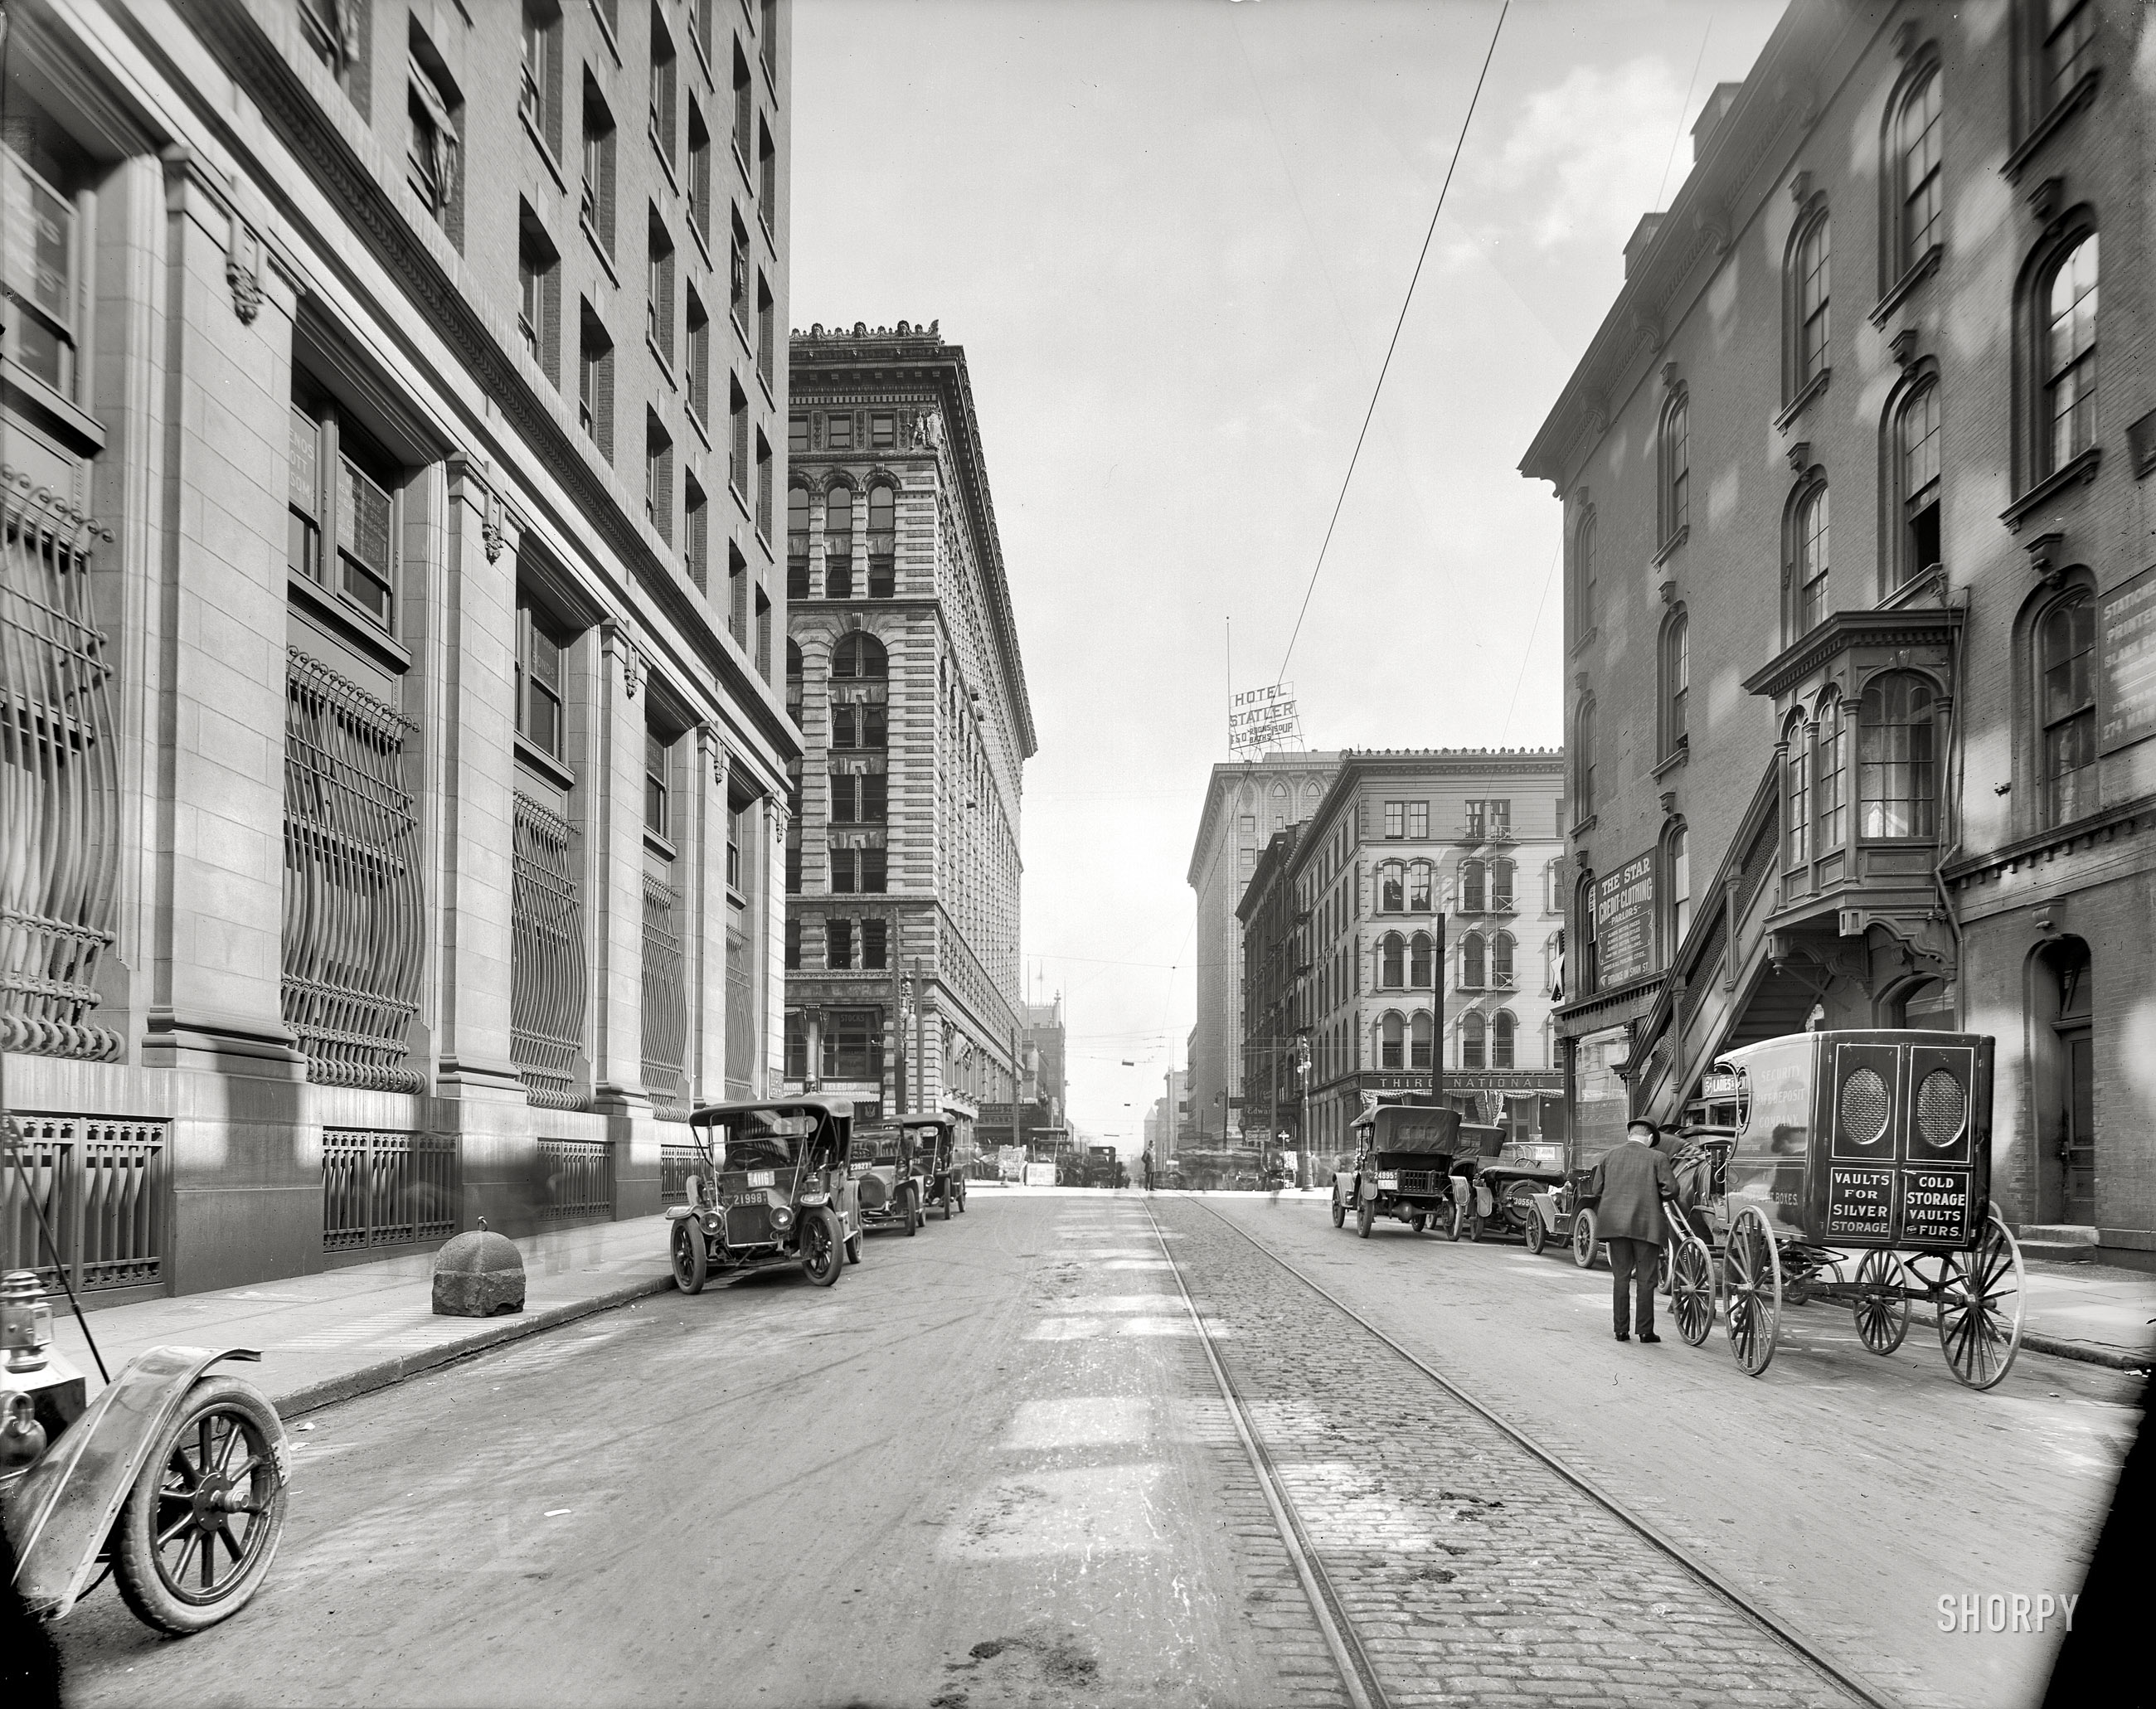 Buffalo, New York, circa 1911. "Swan Street." The motorcar gains a foothold where hooves once trod on Swan in Buffalo. 8x10 glass negative. View full size.